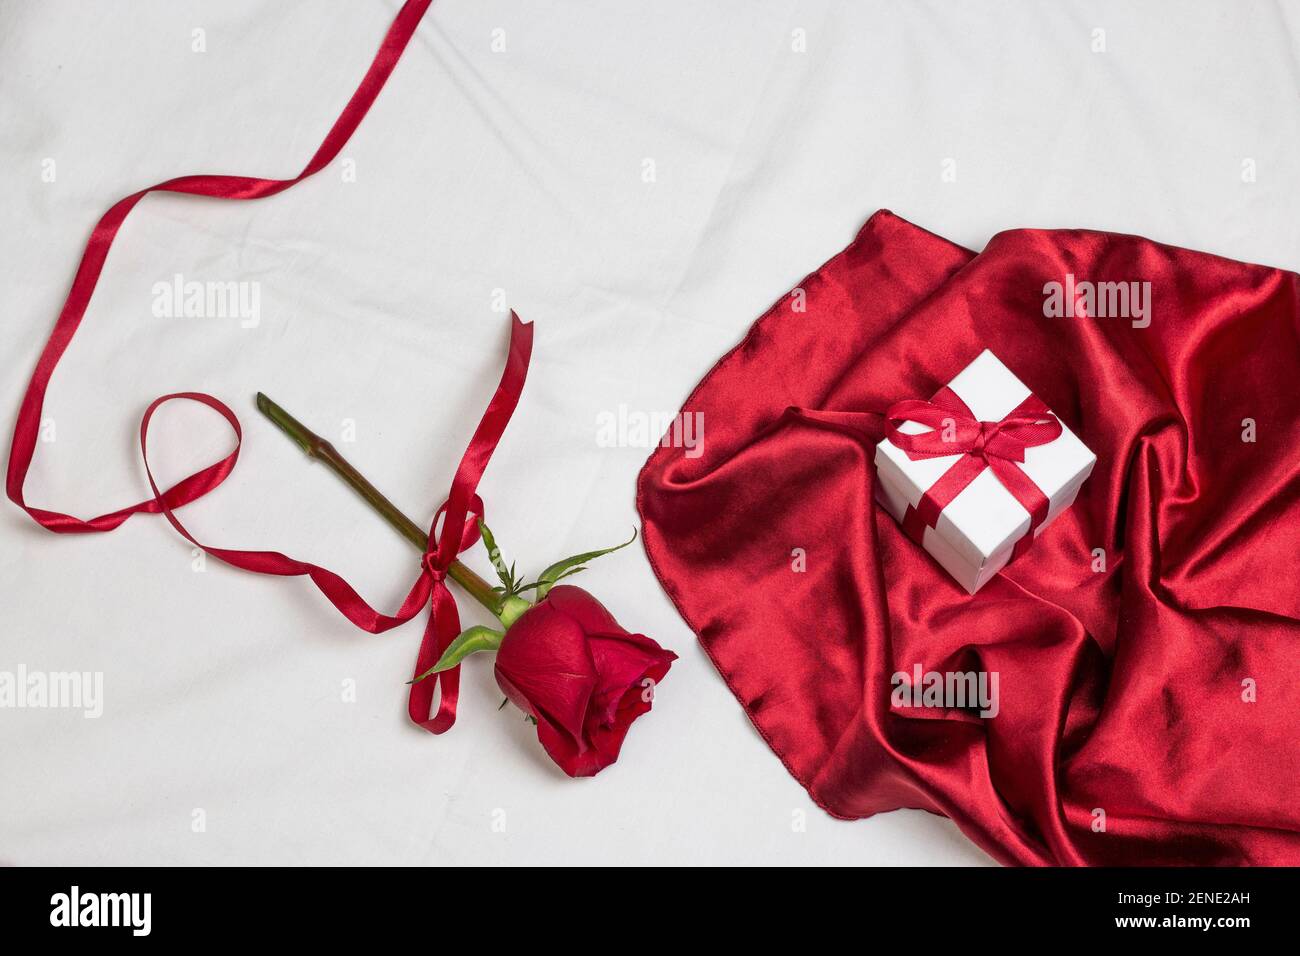 Red rose with red ribbon and red satin fabric with gif box on white bed with pillow. Valentine’s day or holiday romantic background Stock Photo